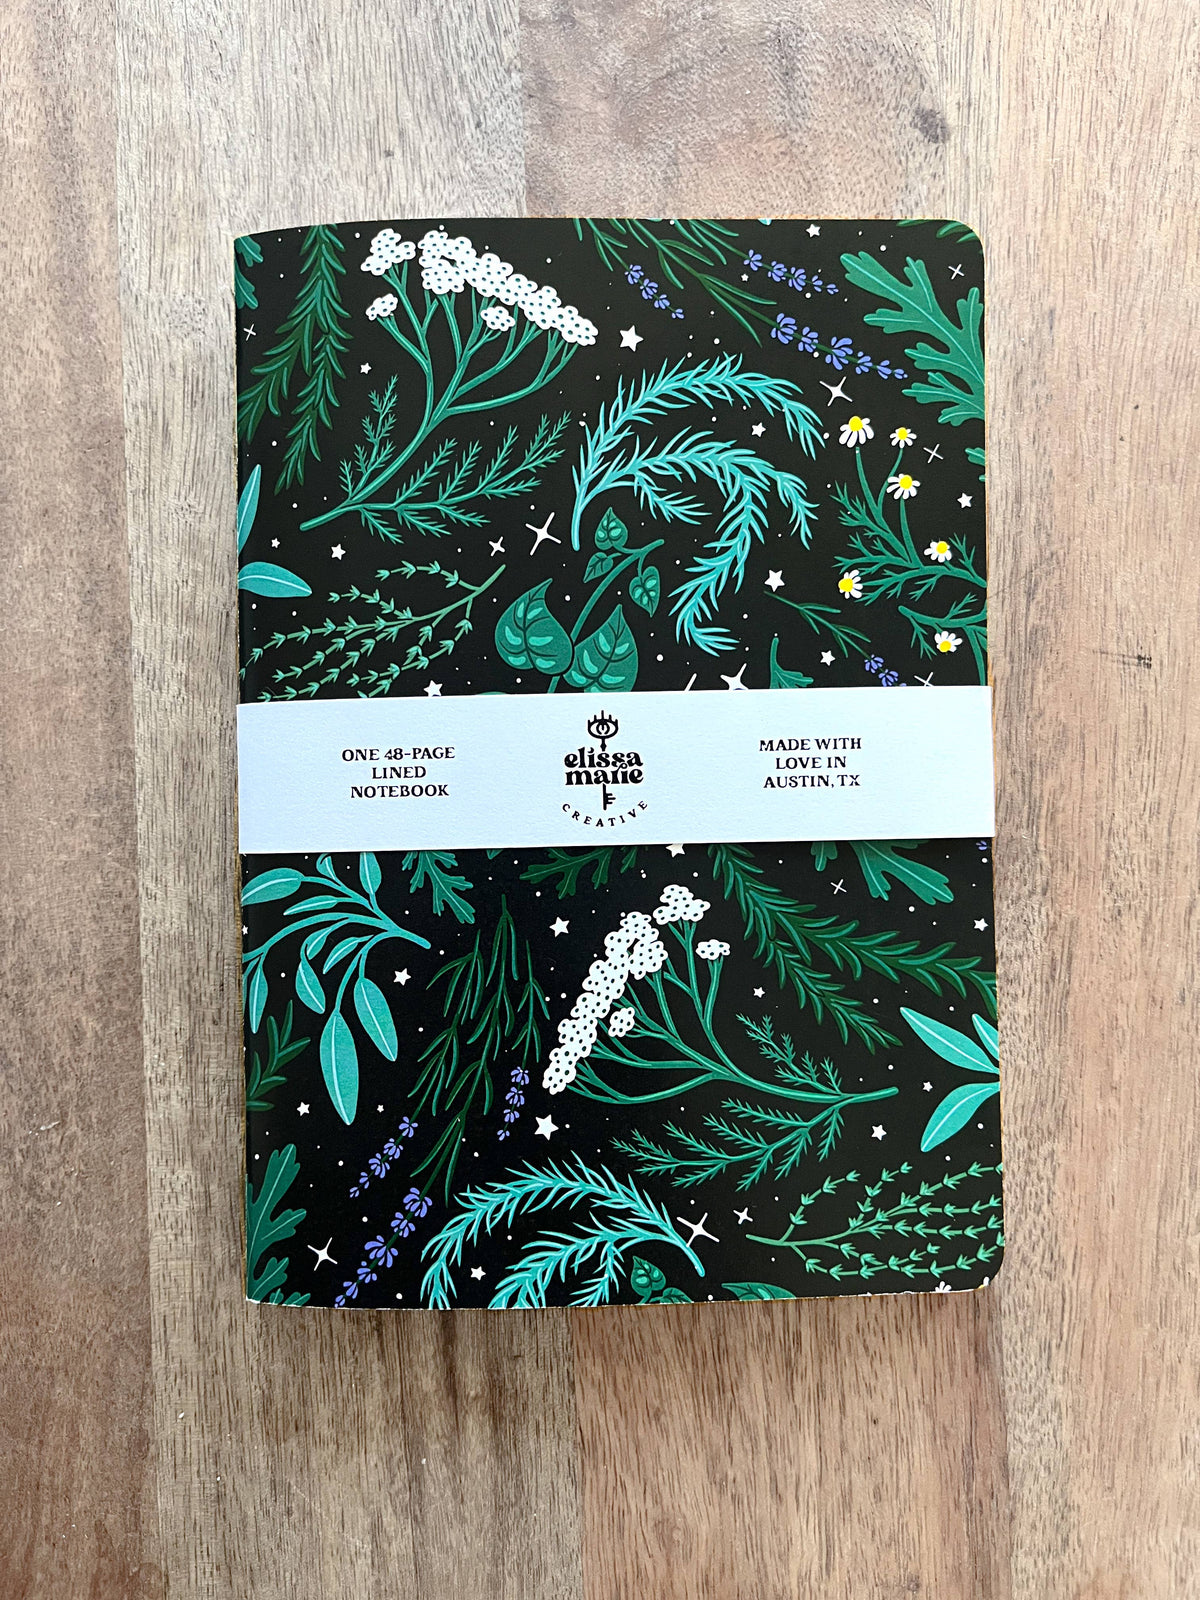 Herbaceous 5x7 Lined Notebook | stationery | journal | herbs